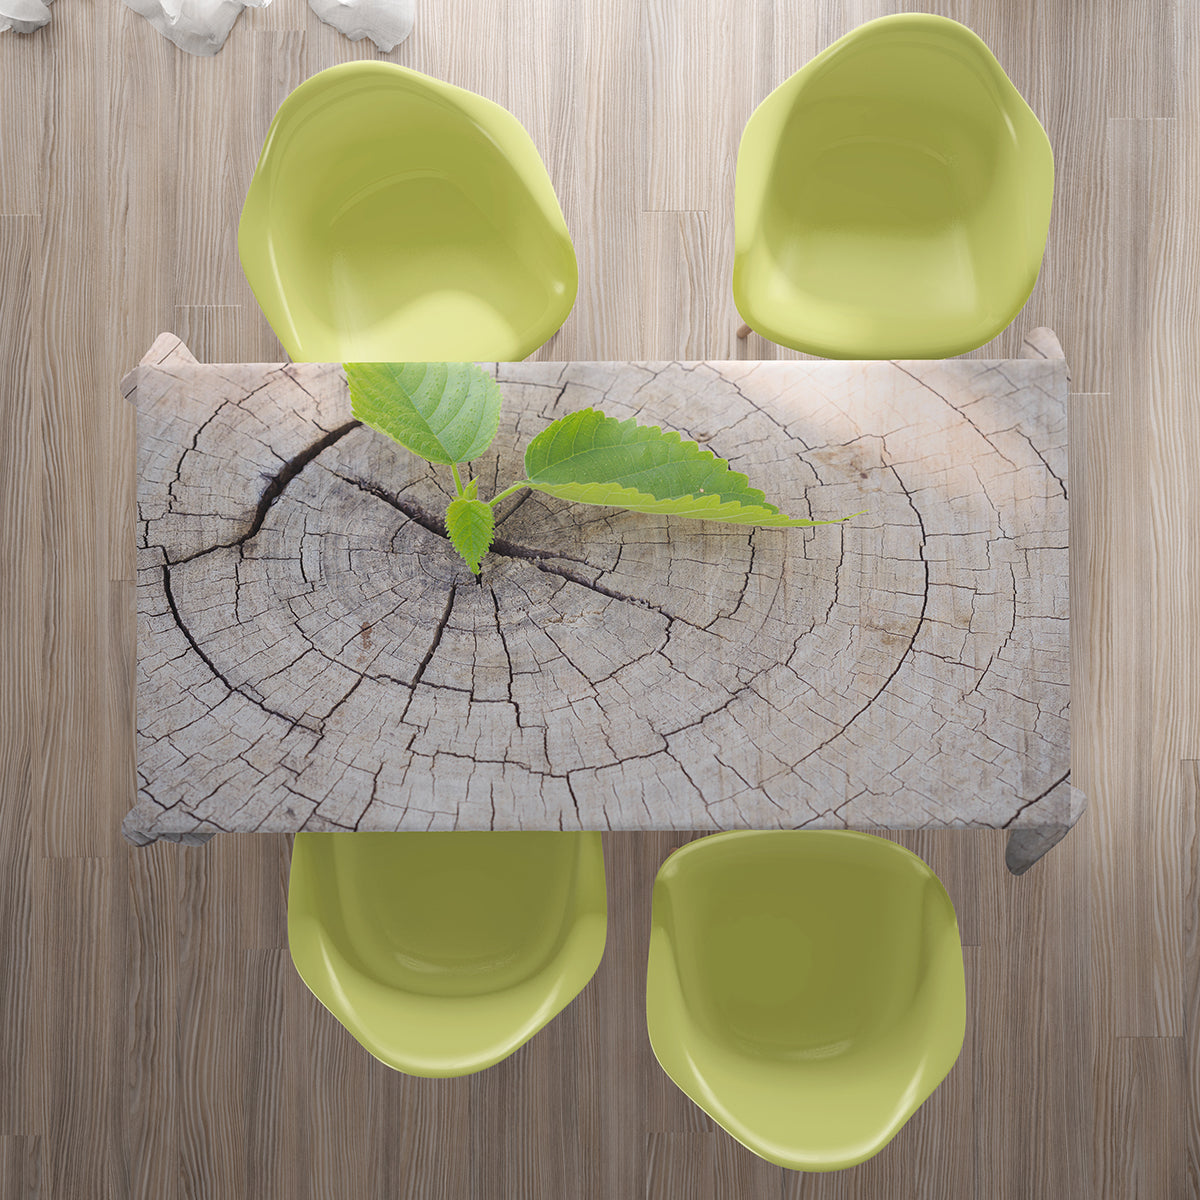 Tablecloth Tree Stump and Sprout - Wellmira